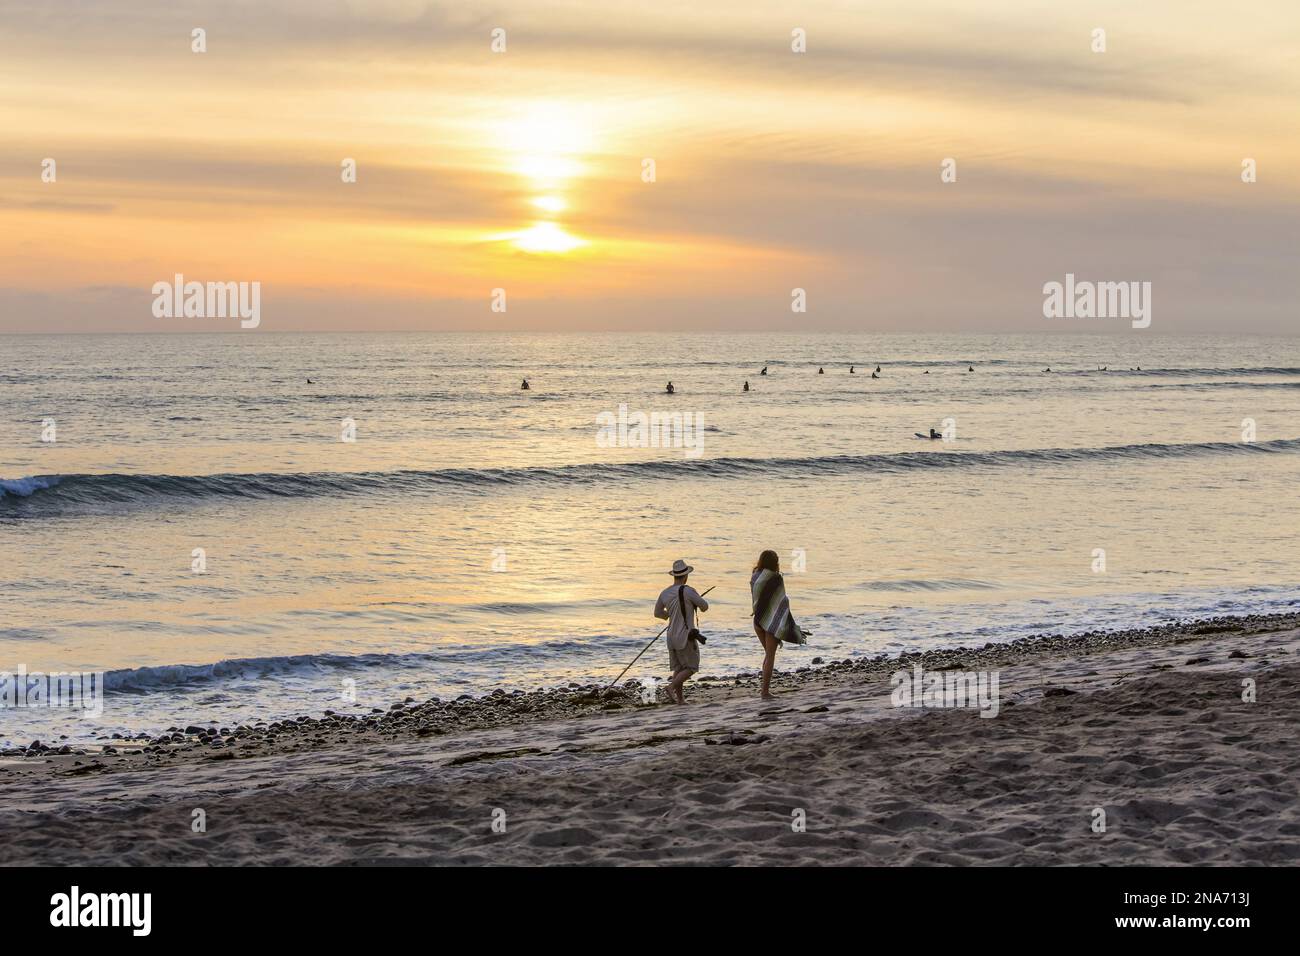 Surfers in the water and people walking the beach at sunset, San Onofre State Beach; San Clemente, California, United States Stock Photo